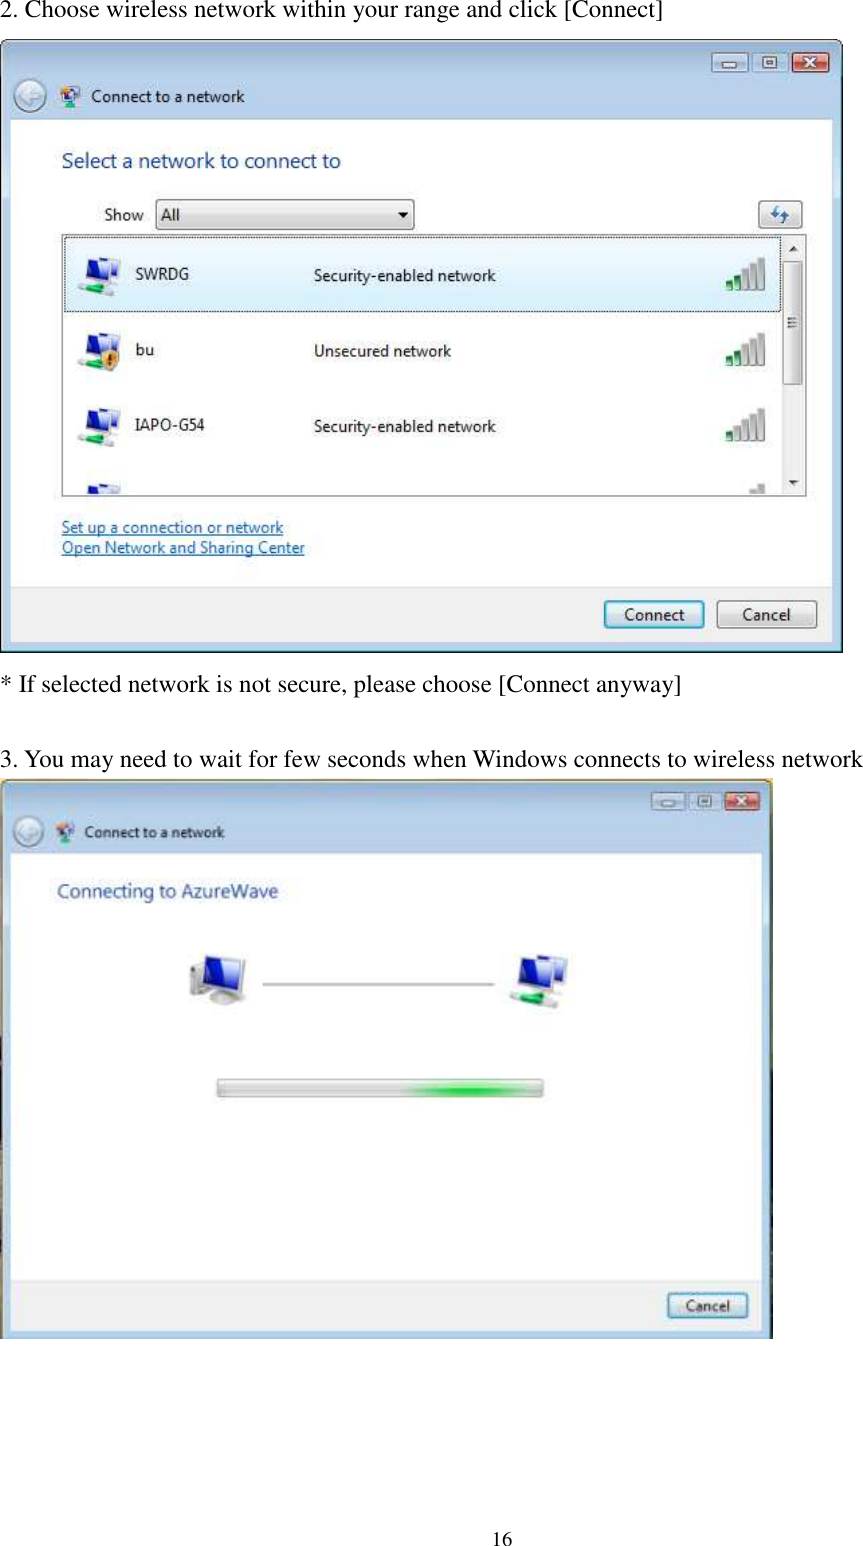   162. Choose wireless network within your range and click [Connect]  * If selected network is not secure, please choose [Connect anyway]  3. You may need to wait for few seconds when Windows connects to wireless network       